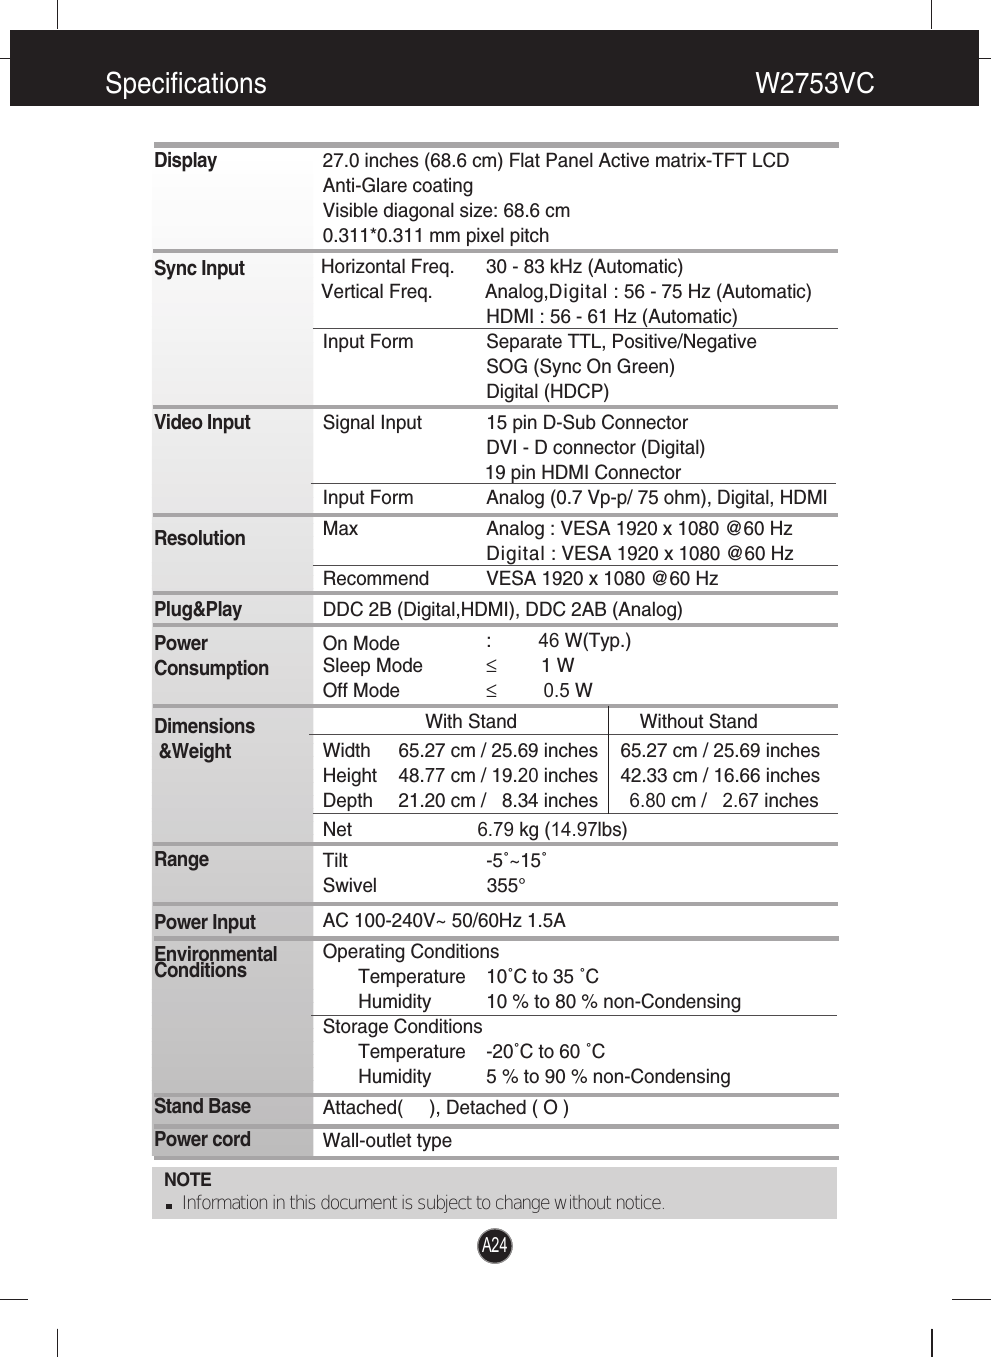 A24A24A24Specifications                                                                   W2753VCNOTEInformation in this document is subject to change without notice.DisplaySync InputVideo InputResolutionPlug&amp;PlayPowerConsumptionDimensions&amp;WeightRangePower InputEnvironmentalConditionsStand BasePower cord 27.0 inches (68.6 cm) Flat Panel Active matrix-TFT LCD Anti-Glare coatingVisible diagonal size: 68.6 cm0.311*0.311 mm pixel pitchHorizontal Freq.      30 - 83 kHz (Automatic)Vertical Freq.          Analog,Digital : 56 - 75 Hz (Automatic)HDMI : 56 - 61 Hz (Automatic)Input Form Separate TTL, Positive/NegativeSOG (Sync On Green) Digital (HDCP)Signal Input 15 pin D-Sub ConnectorDVI - D connector (Digital)19 pin HDMI ConnectorInput Form Analog (0.7 Vp-p/ 75 ohm), Digital, HDMIMax Analog : VESA 1920 x 1080 @60 HzDigital : VESA 1920 x 1080 @60 HzRecommend VESA 1920 x 1080 @60 HzDDC 2B (Digital,HDMI), DDC 2AB (Analog)On Mode :         46 W(Typ.)Sleep Mode ≤1 WOff Mode ≤         0.5 WWith Stand Without StandWidth 65.27 cm / 25.69 inches 65.27 cm / 25.69 inchesHeight 48.77 cm / 19.20 inches   42.33 cm / 16.66 inchesDepth 21.20 cm /   8.34 inches      6.80 cm /   2.67 inchesNet                        6.79 kg (14.97lbs)Tilt -5˚~15˚Swivel                     355°AC 100-240V~ 50/60Hz 1.5A Operating ConditionsTemperature 10˚C to 35 ˚CHumidity 10 % to 80 % non-CondensingStorage ConditionsTemperature -20˚C to 60 ˚CHumidity 5 % to 90 % non-CondensingAttached(     ), Detached ( O )Wall-outlet type